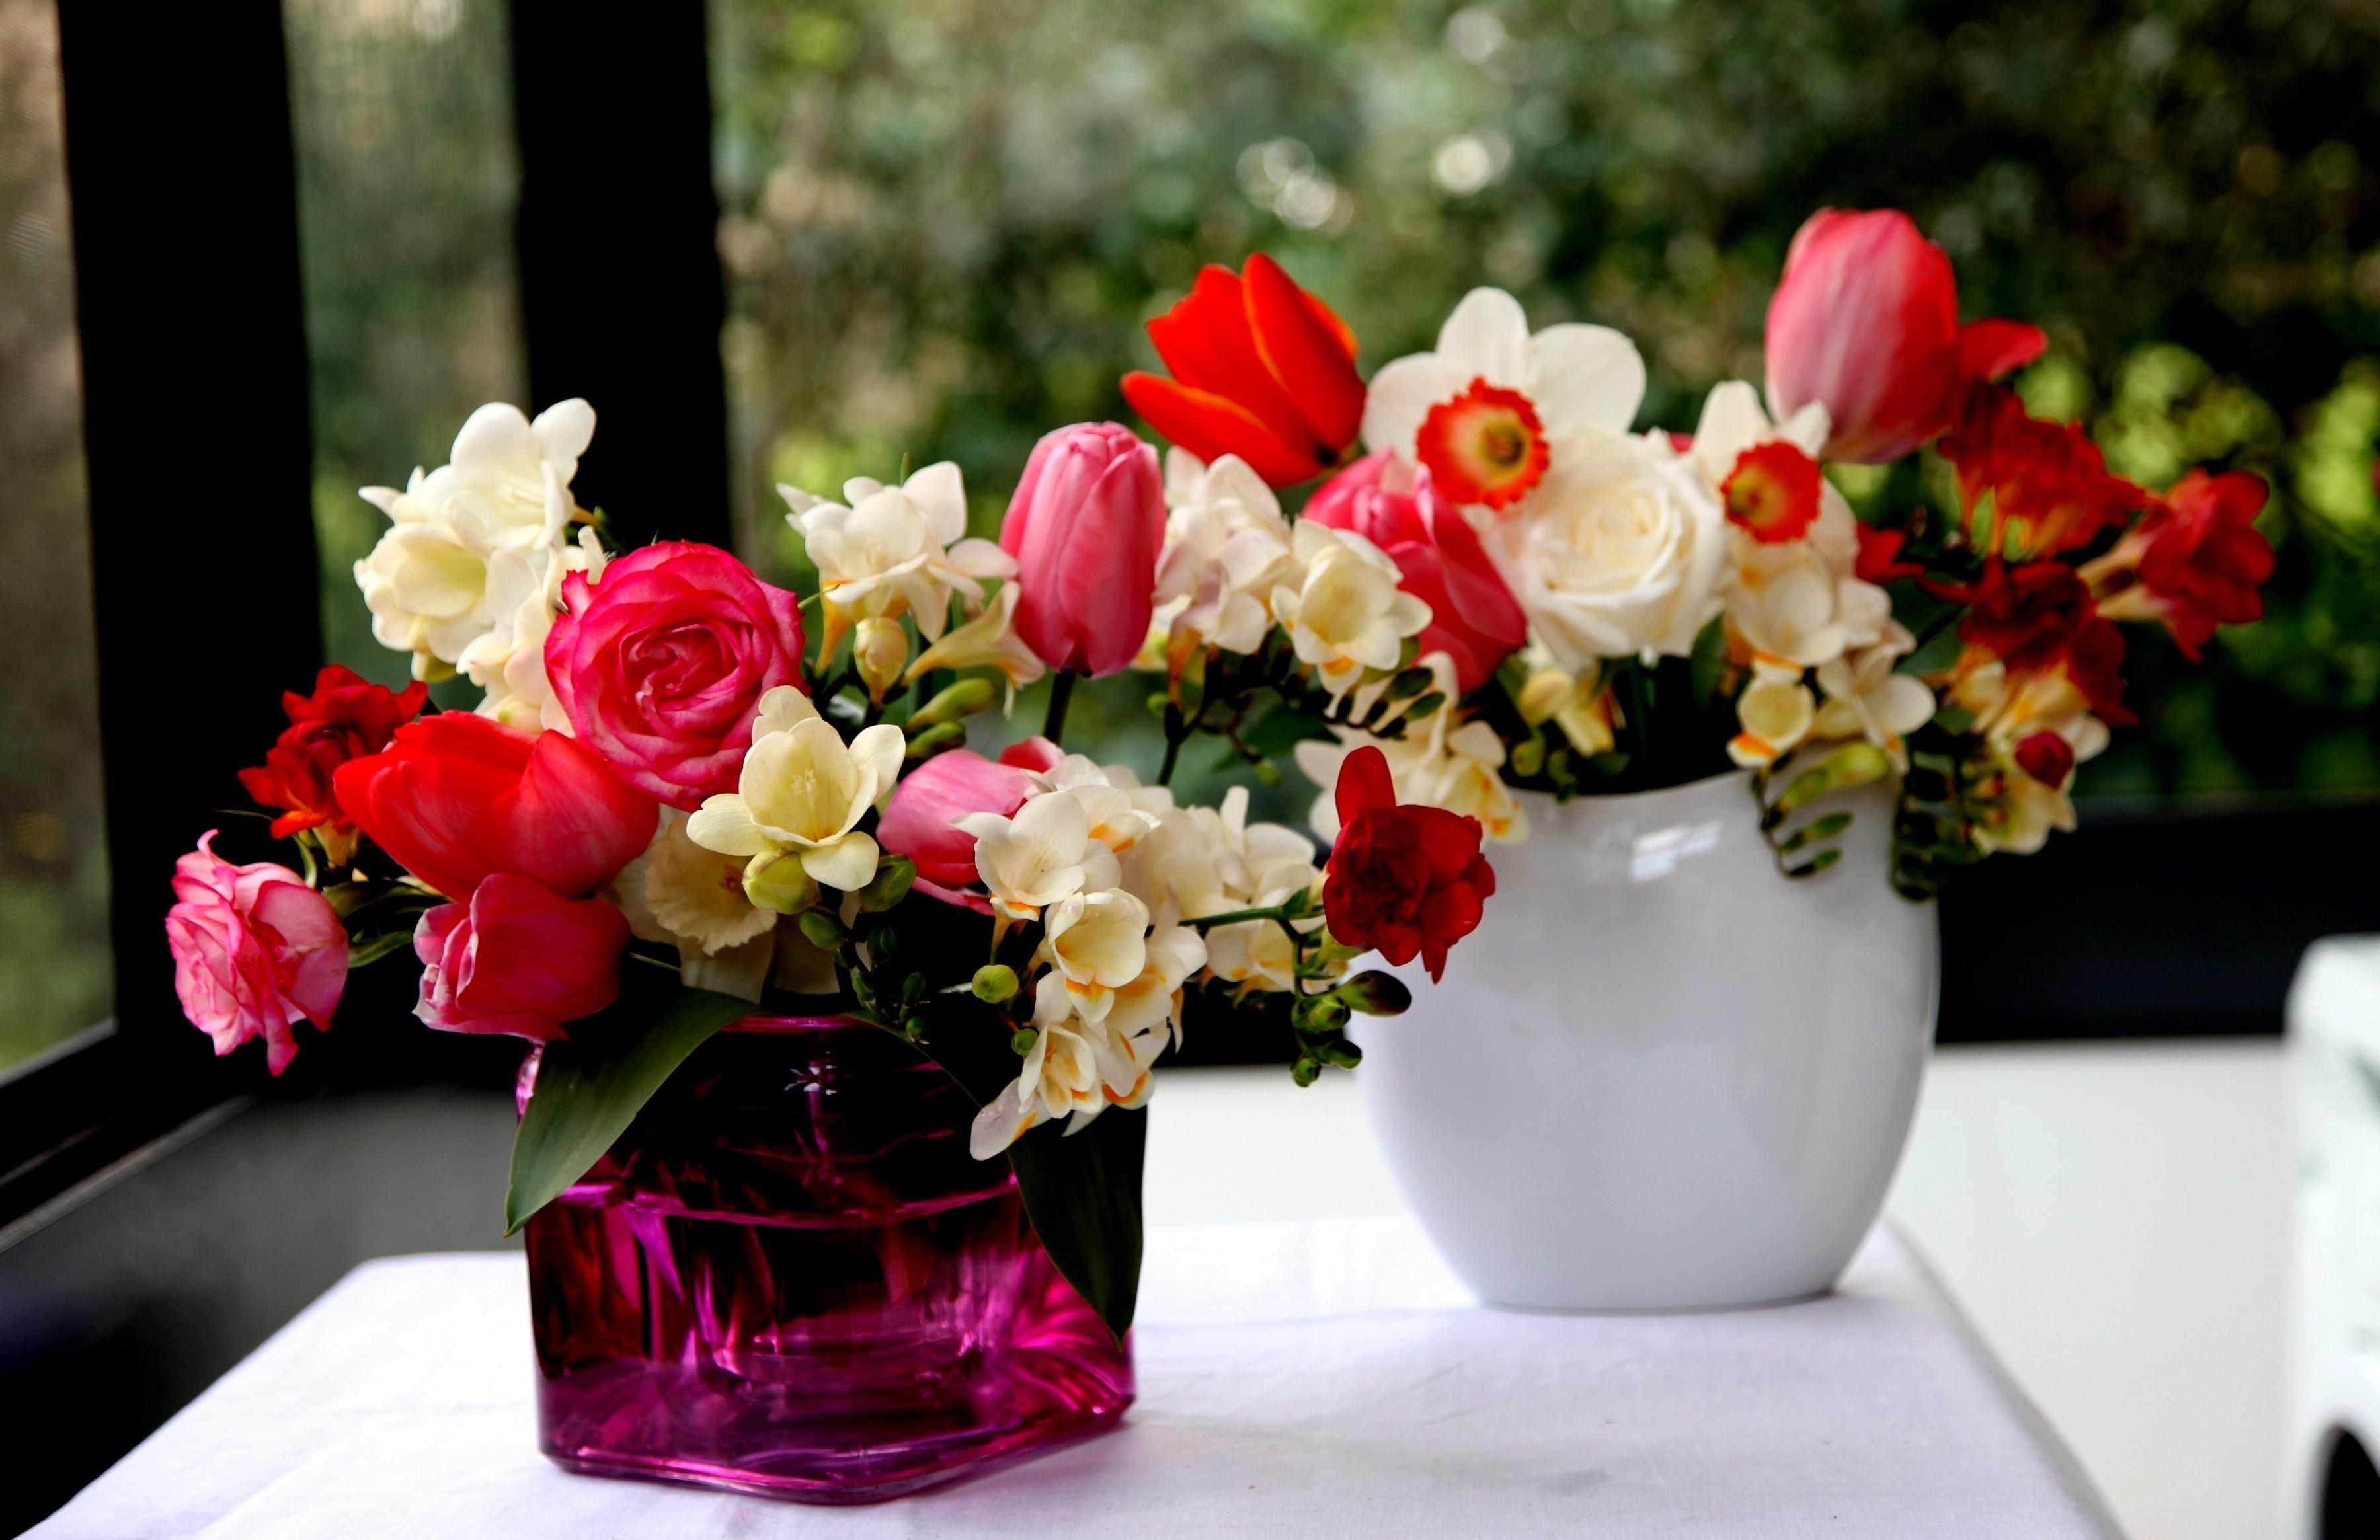 flowers, roses, tulips, narcissussi, bouquets, vases, freesia